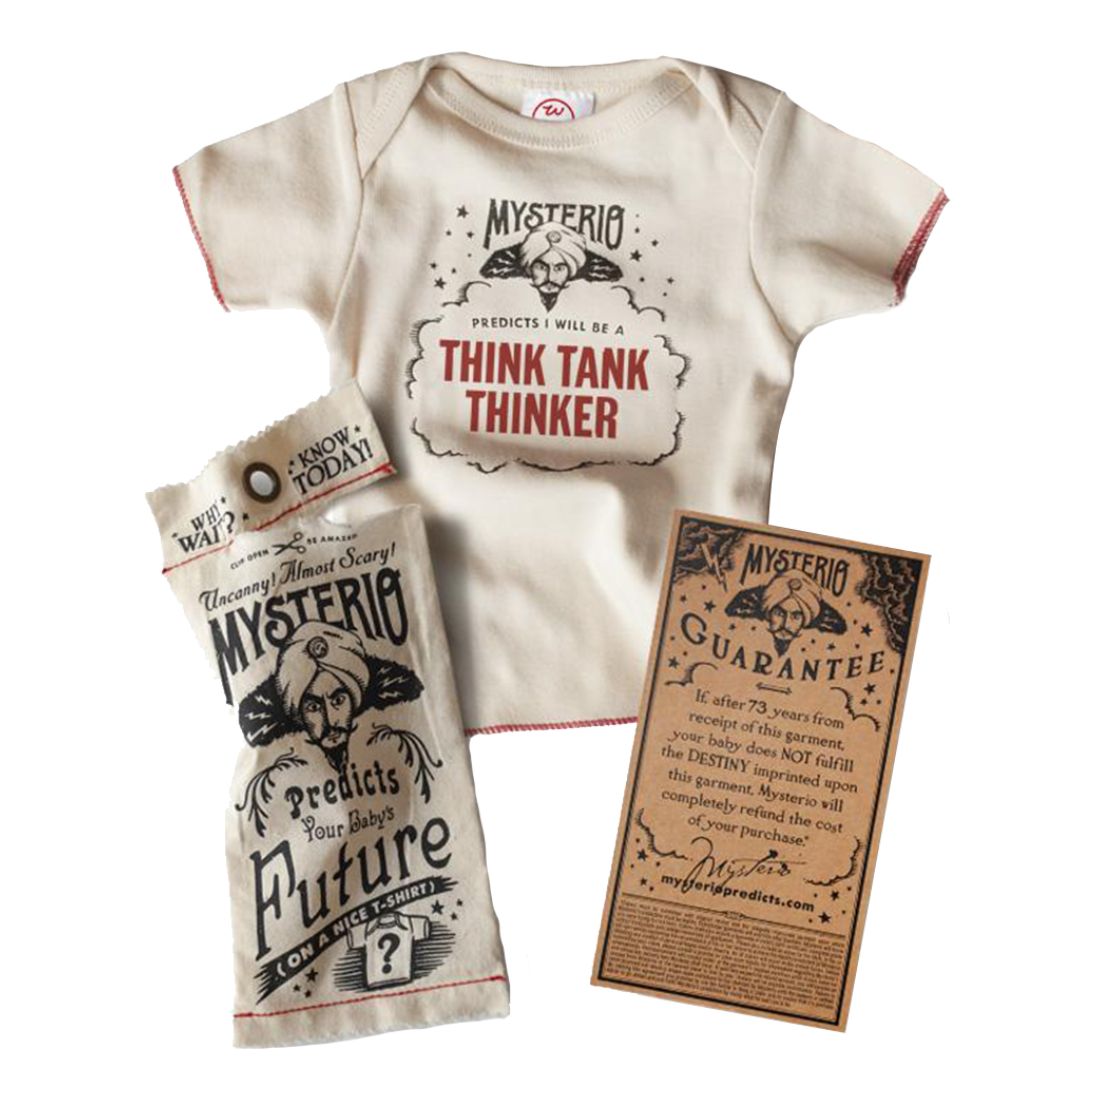 Wry Baby Mysteria Predicts T-Shirt